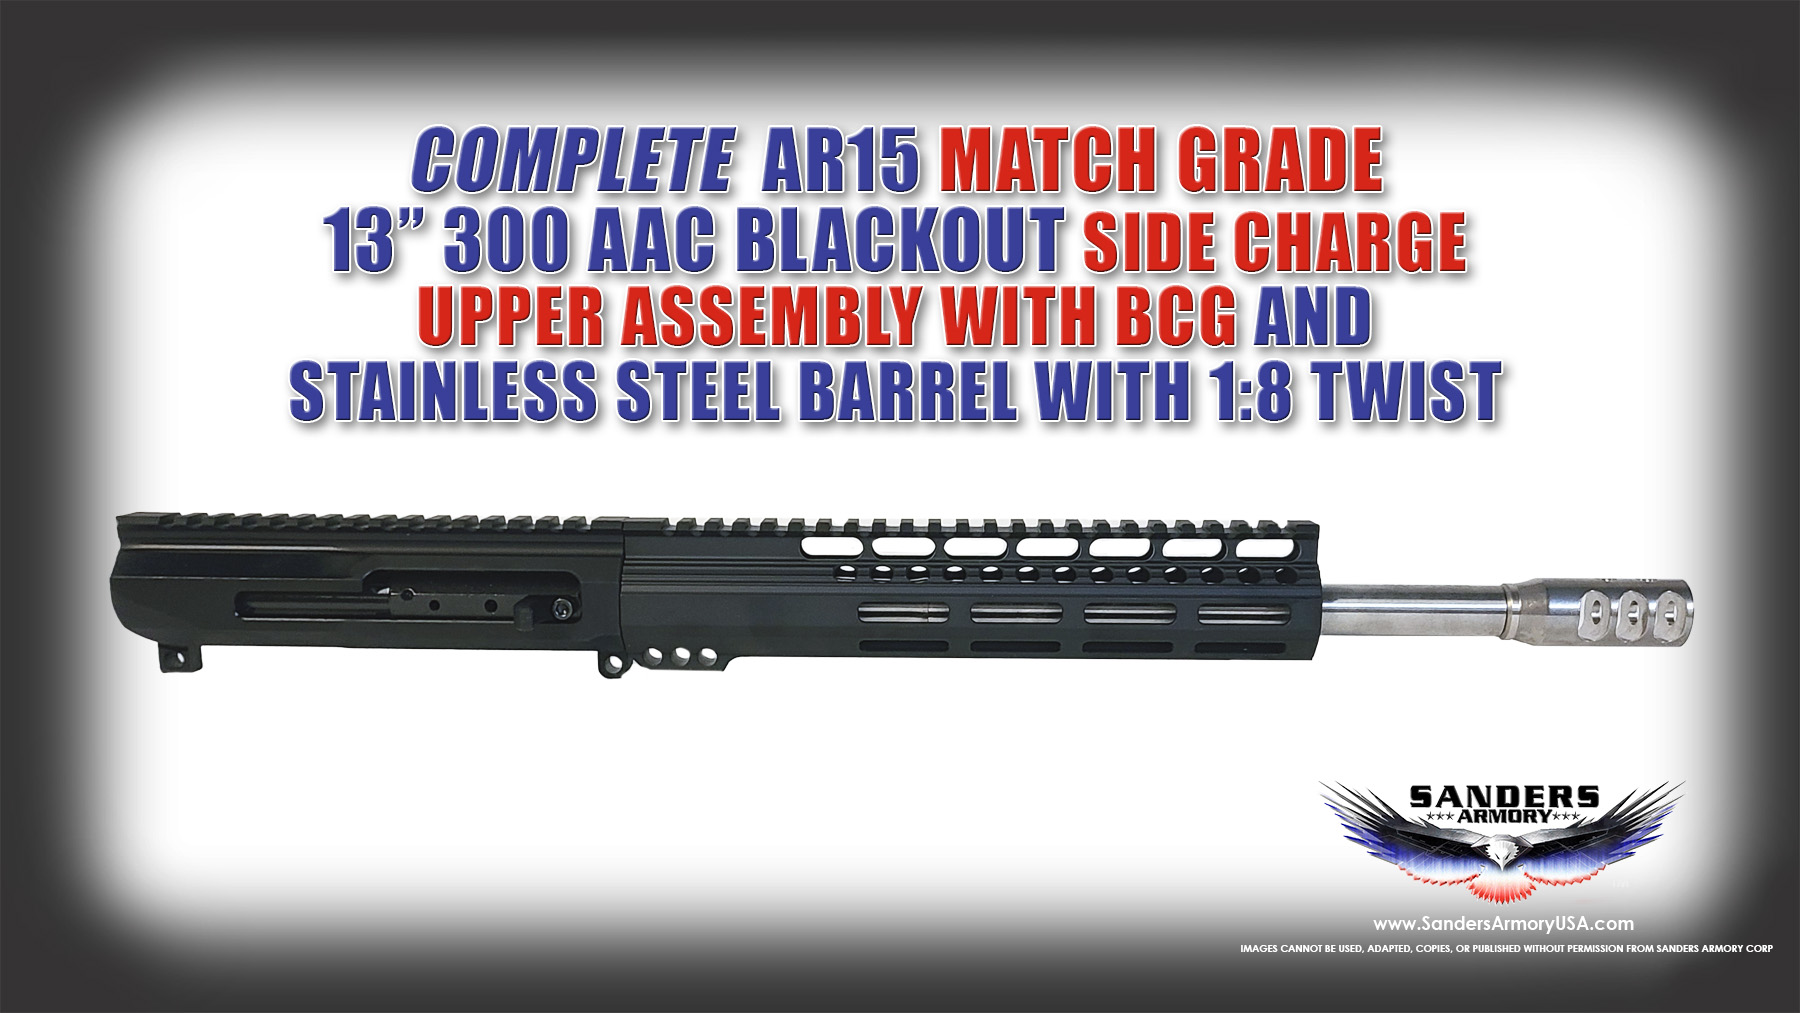 Sanders Armory COMPLETE AR15 match grade 13” 300 AAC Blackout side charge UPPER ASSEMBLY with BCG and stainless steel Barrel with 1:8 twist